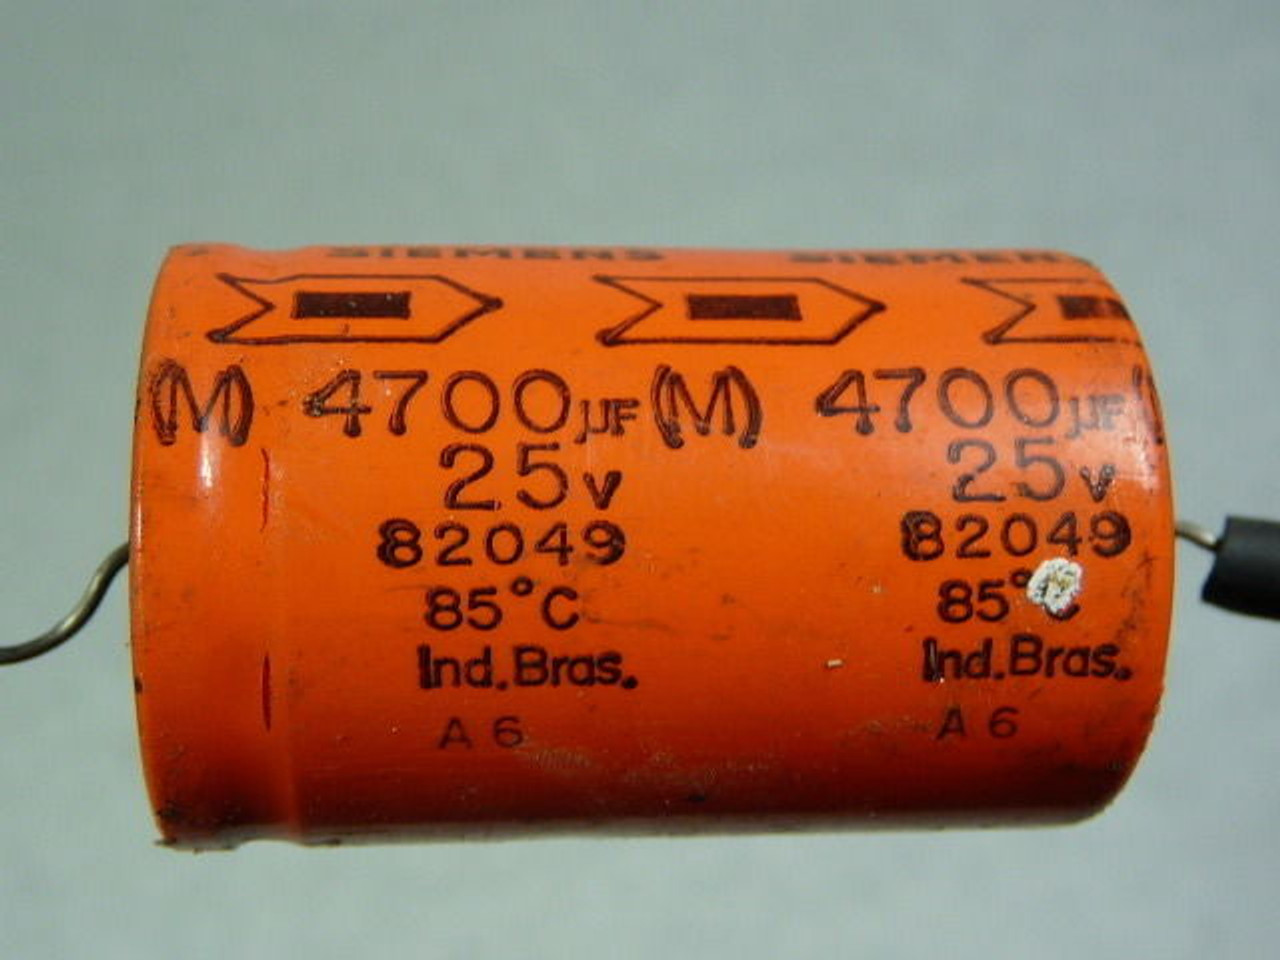 Siemens 82049 Electrolytic Axial Capacitor 4700uF 25V USED